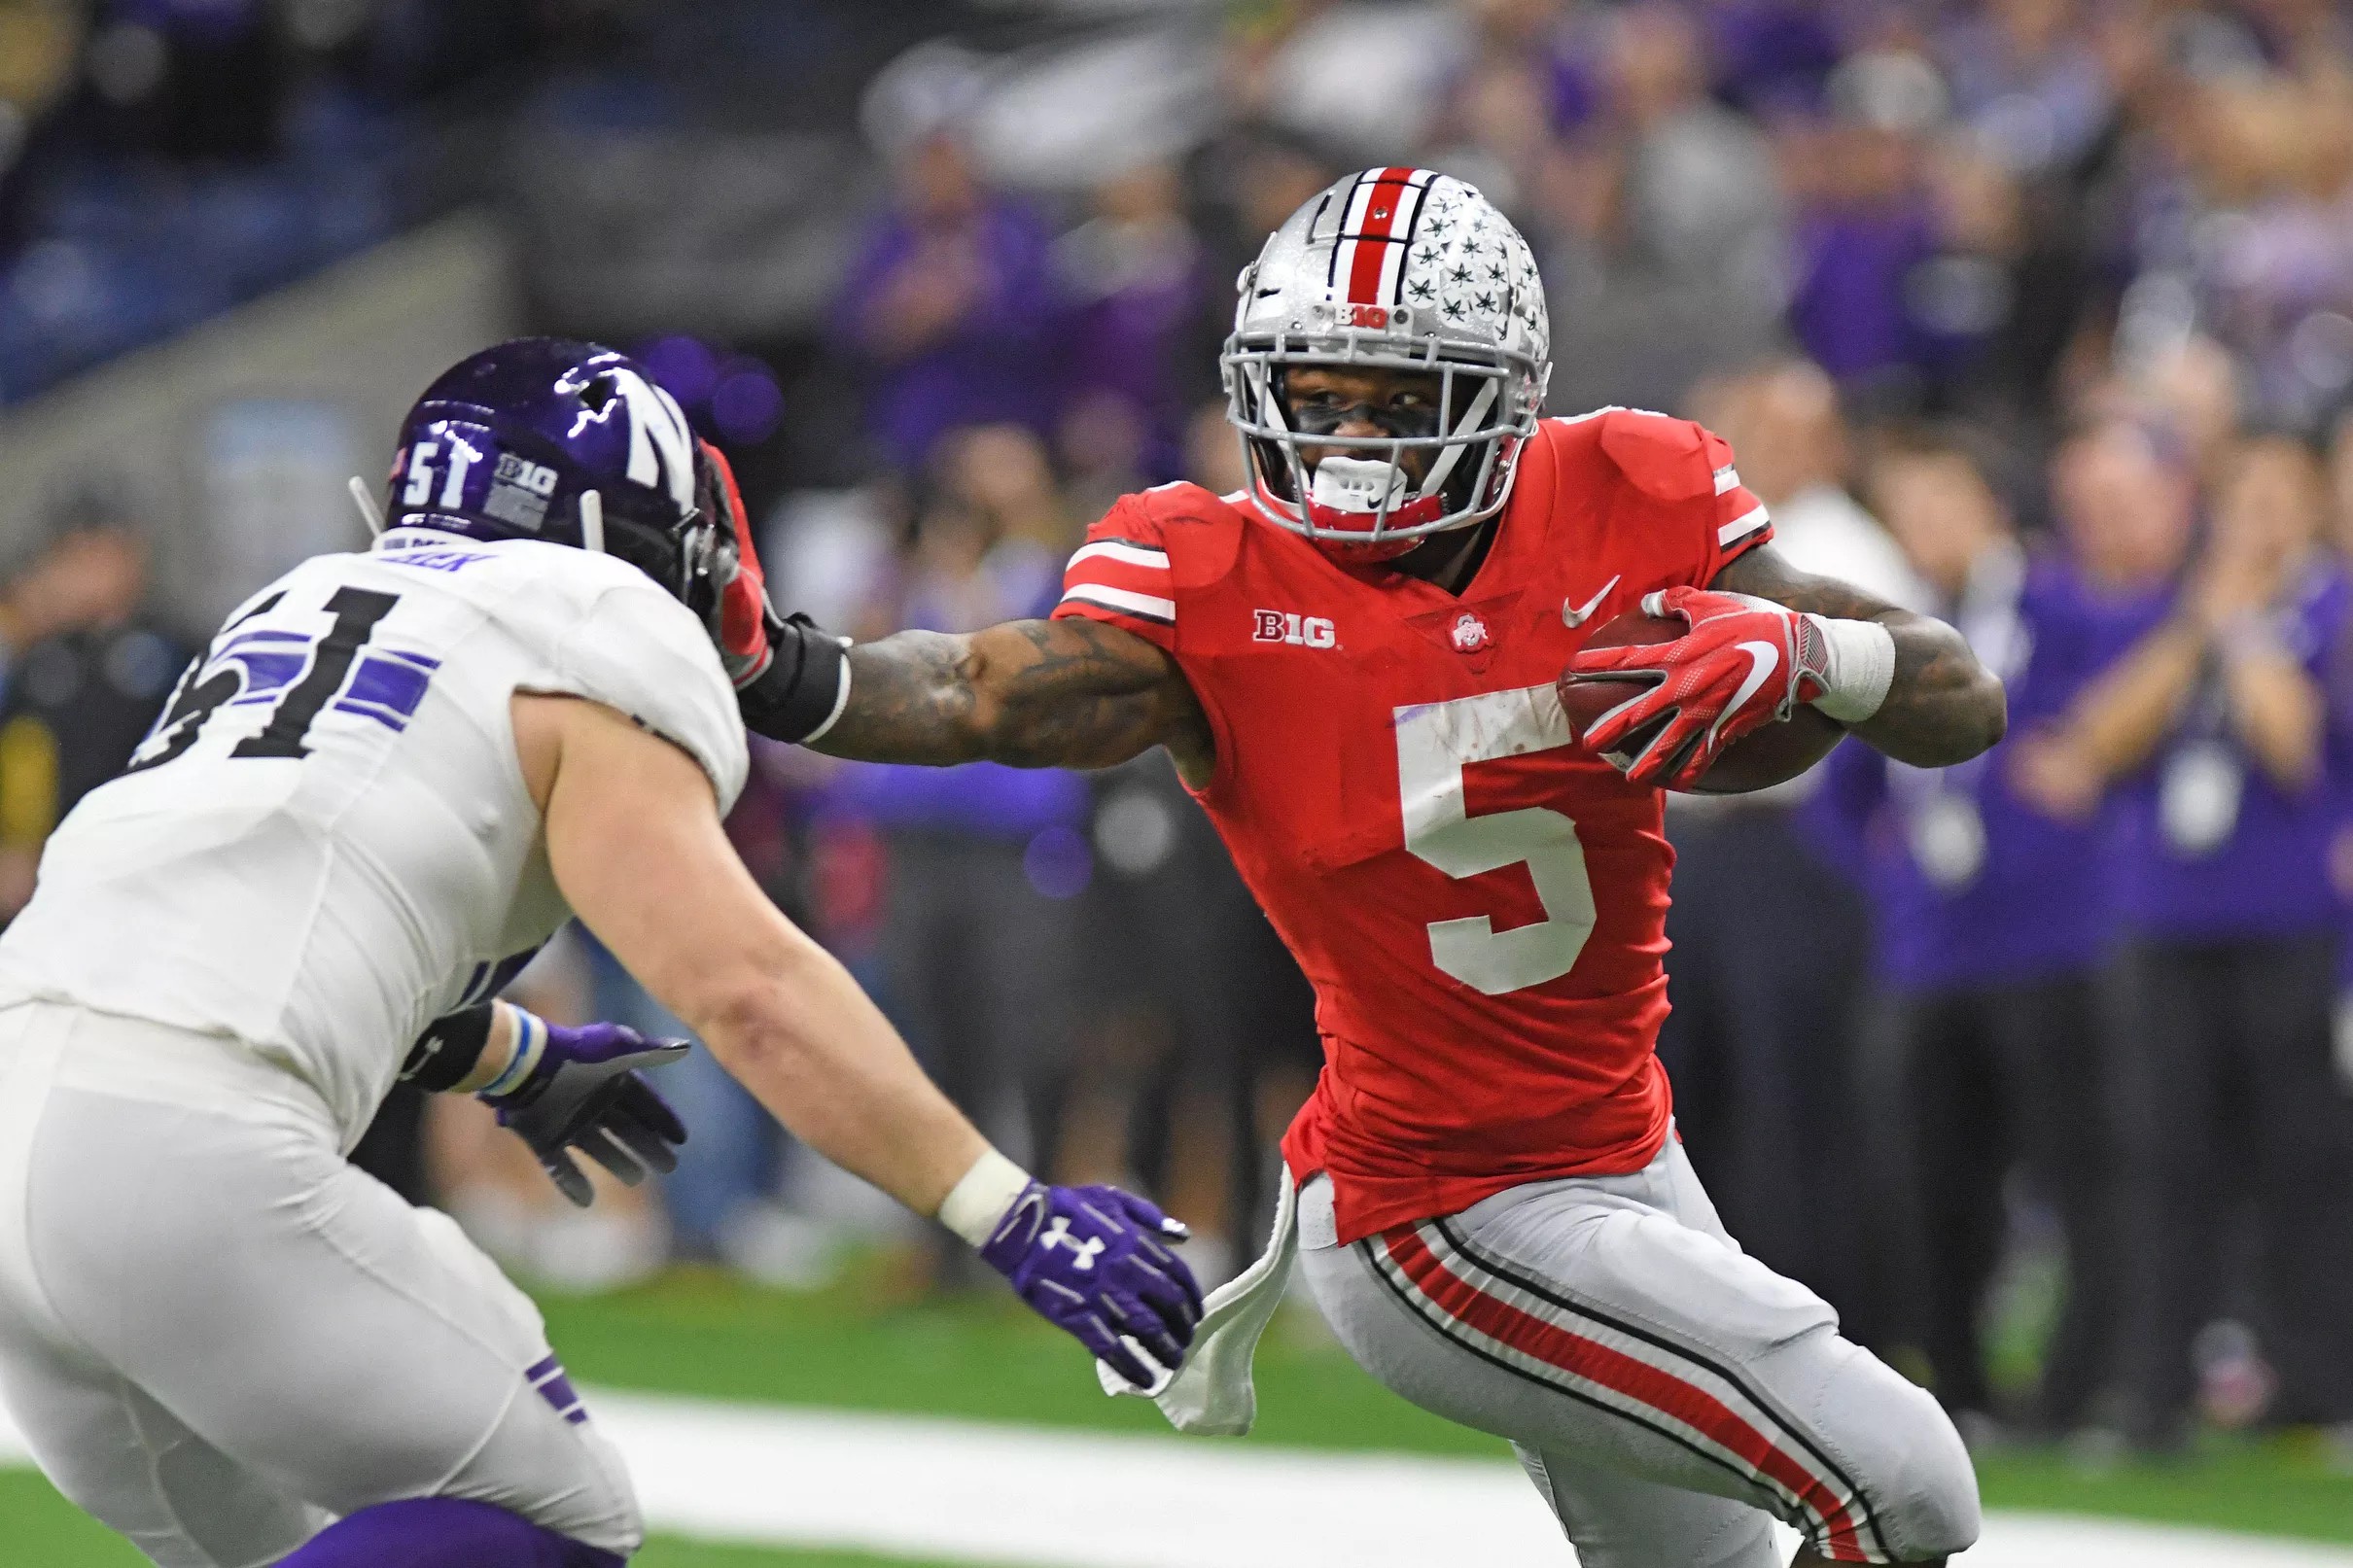 What Ohio State players could sit out the Rose Bowl?